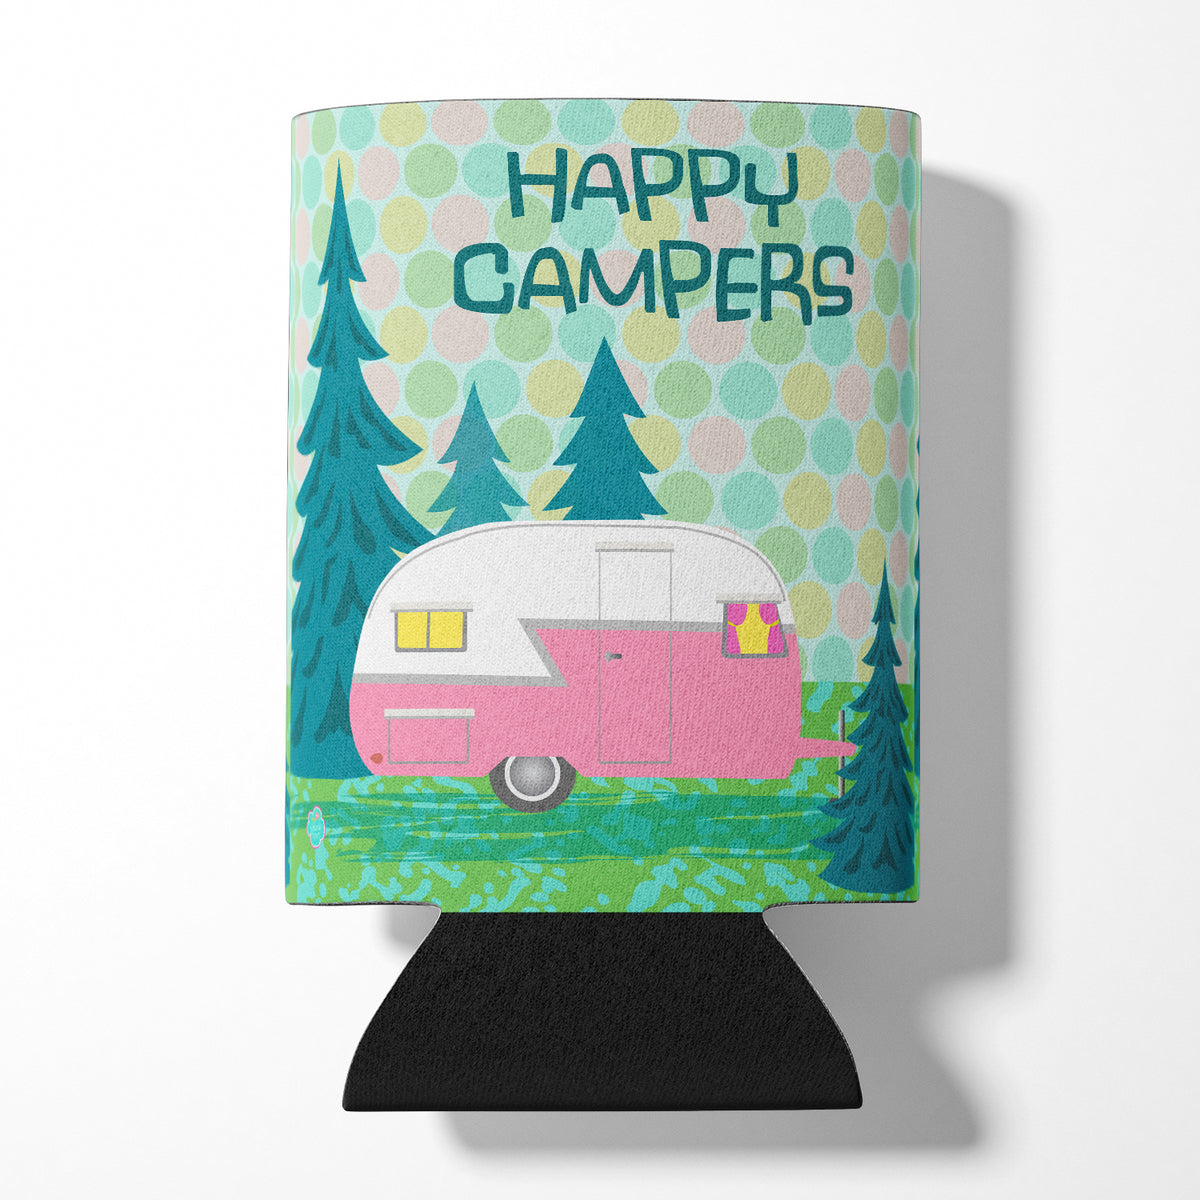 Happy Campers Glamping Trailer Can or Bottle Hugger VHA3004CC